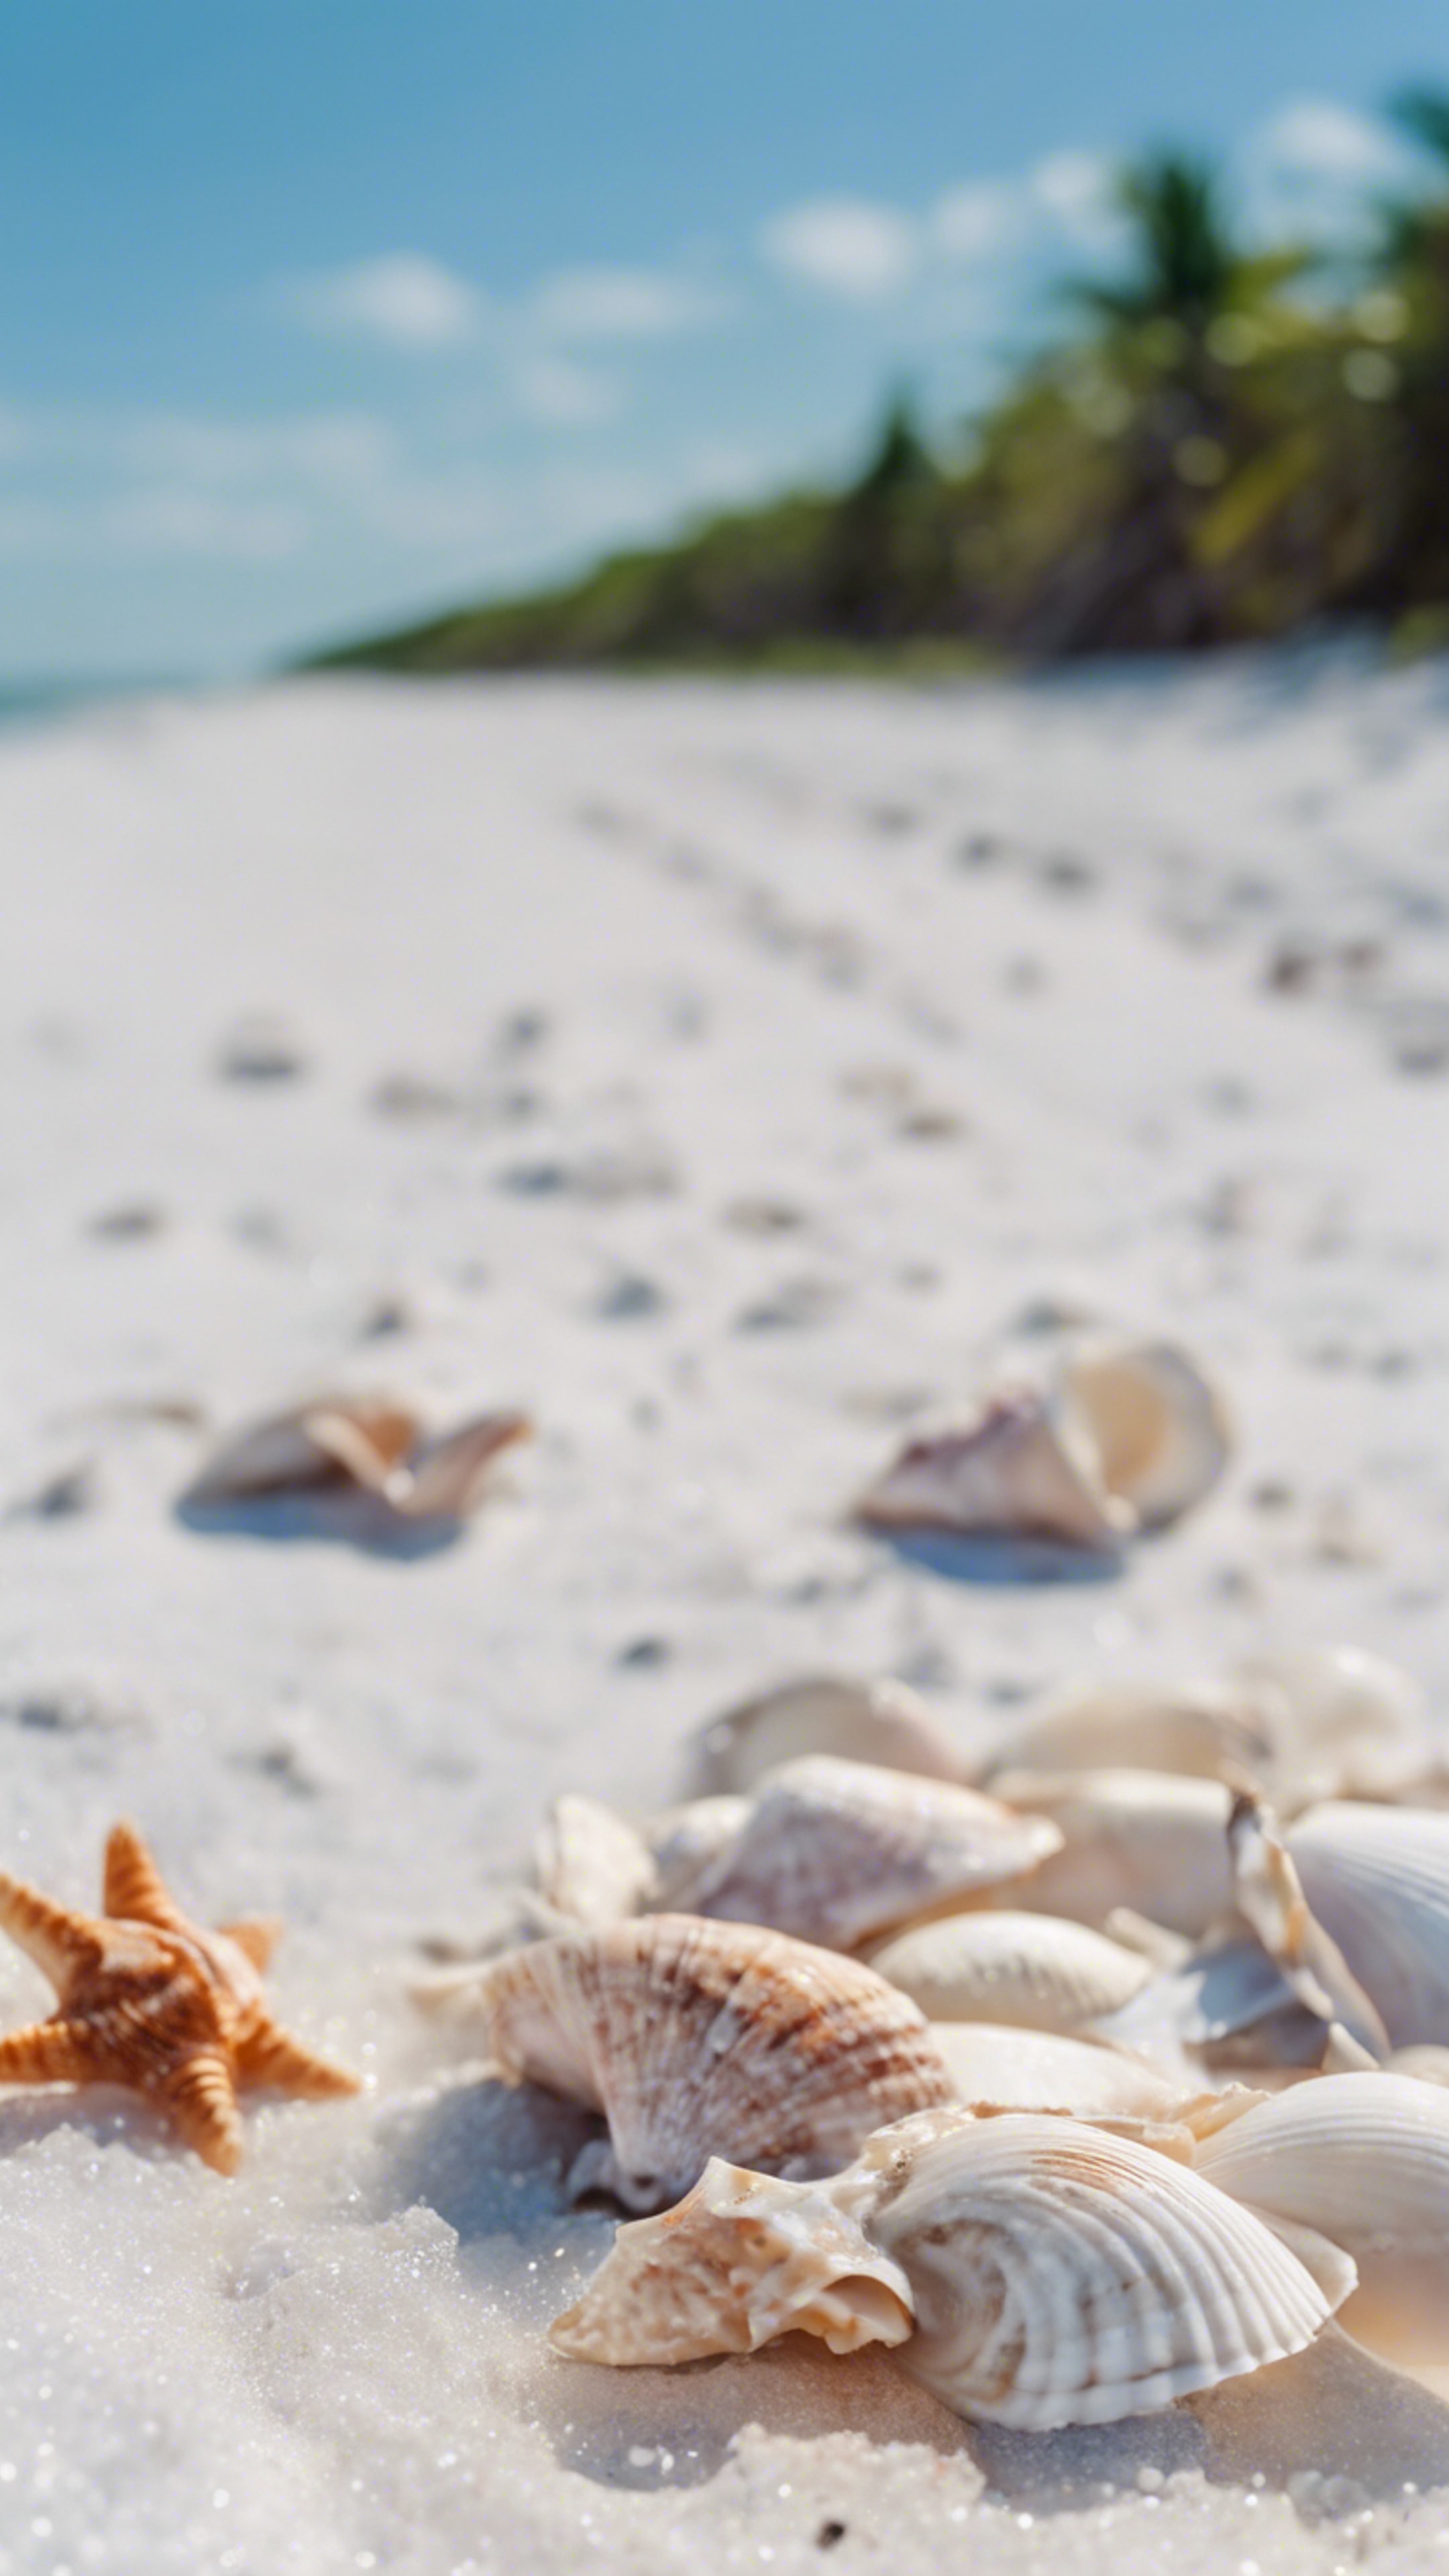 Seashells scattered along the pure white sandy beaches of Sanibel Island under clear, blue skies. Wallpaper[1c53aef66a12437c830d]